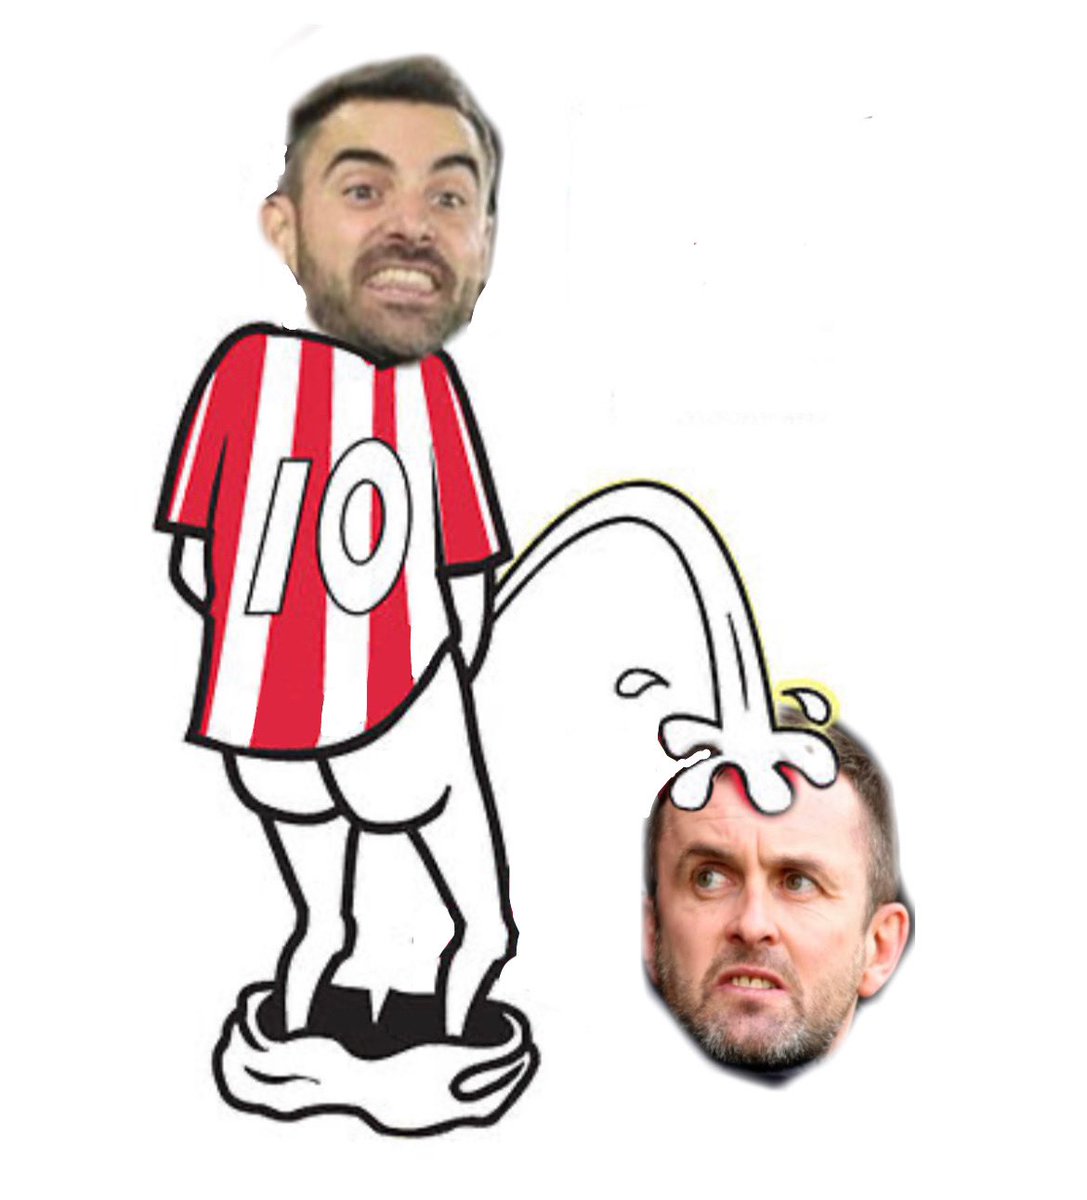 Great win today, showed everything that’s been missing these last few months… 

#Selles #Jones #SfC #Saints #SaintsFc #Southampton #SouthamptonFC #CheSou